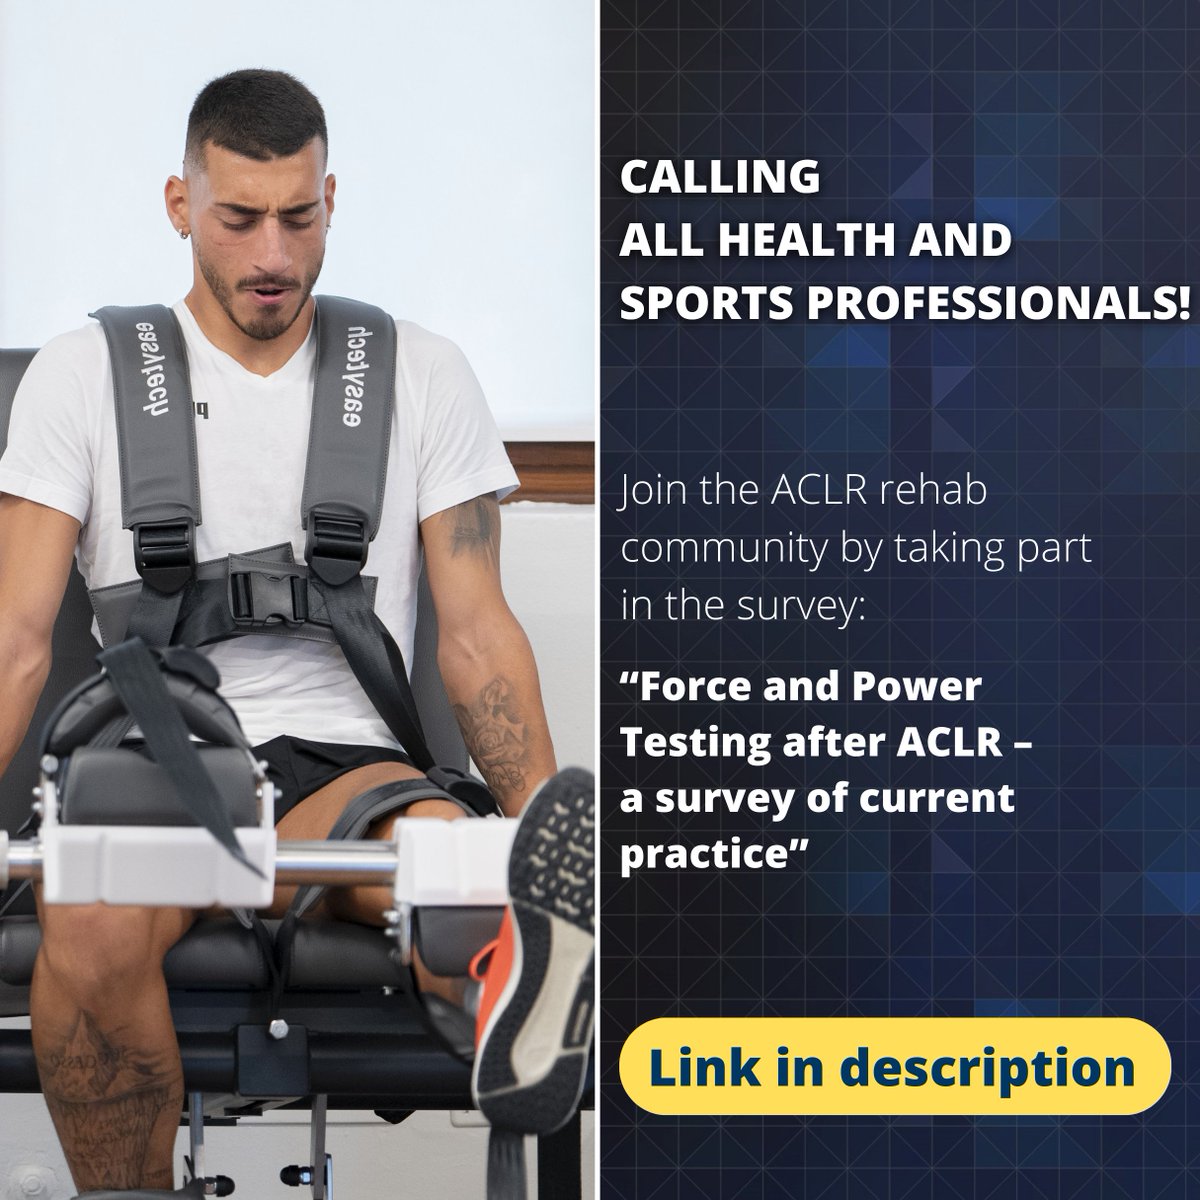 Please consider taking part in the project “Force and Power Testing after Anterior Cruciate Ligament Reconstruction (ACLR) – a survey of current practice”. Shape the future of ACLR rehabilitation! app.onlinesurveys.jisc.ac.uk/s/stmarys/forc…